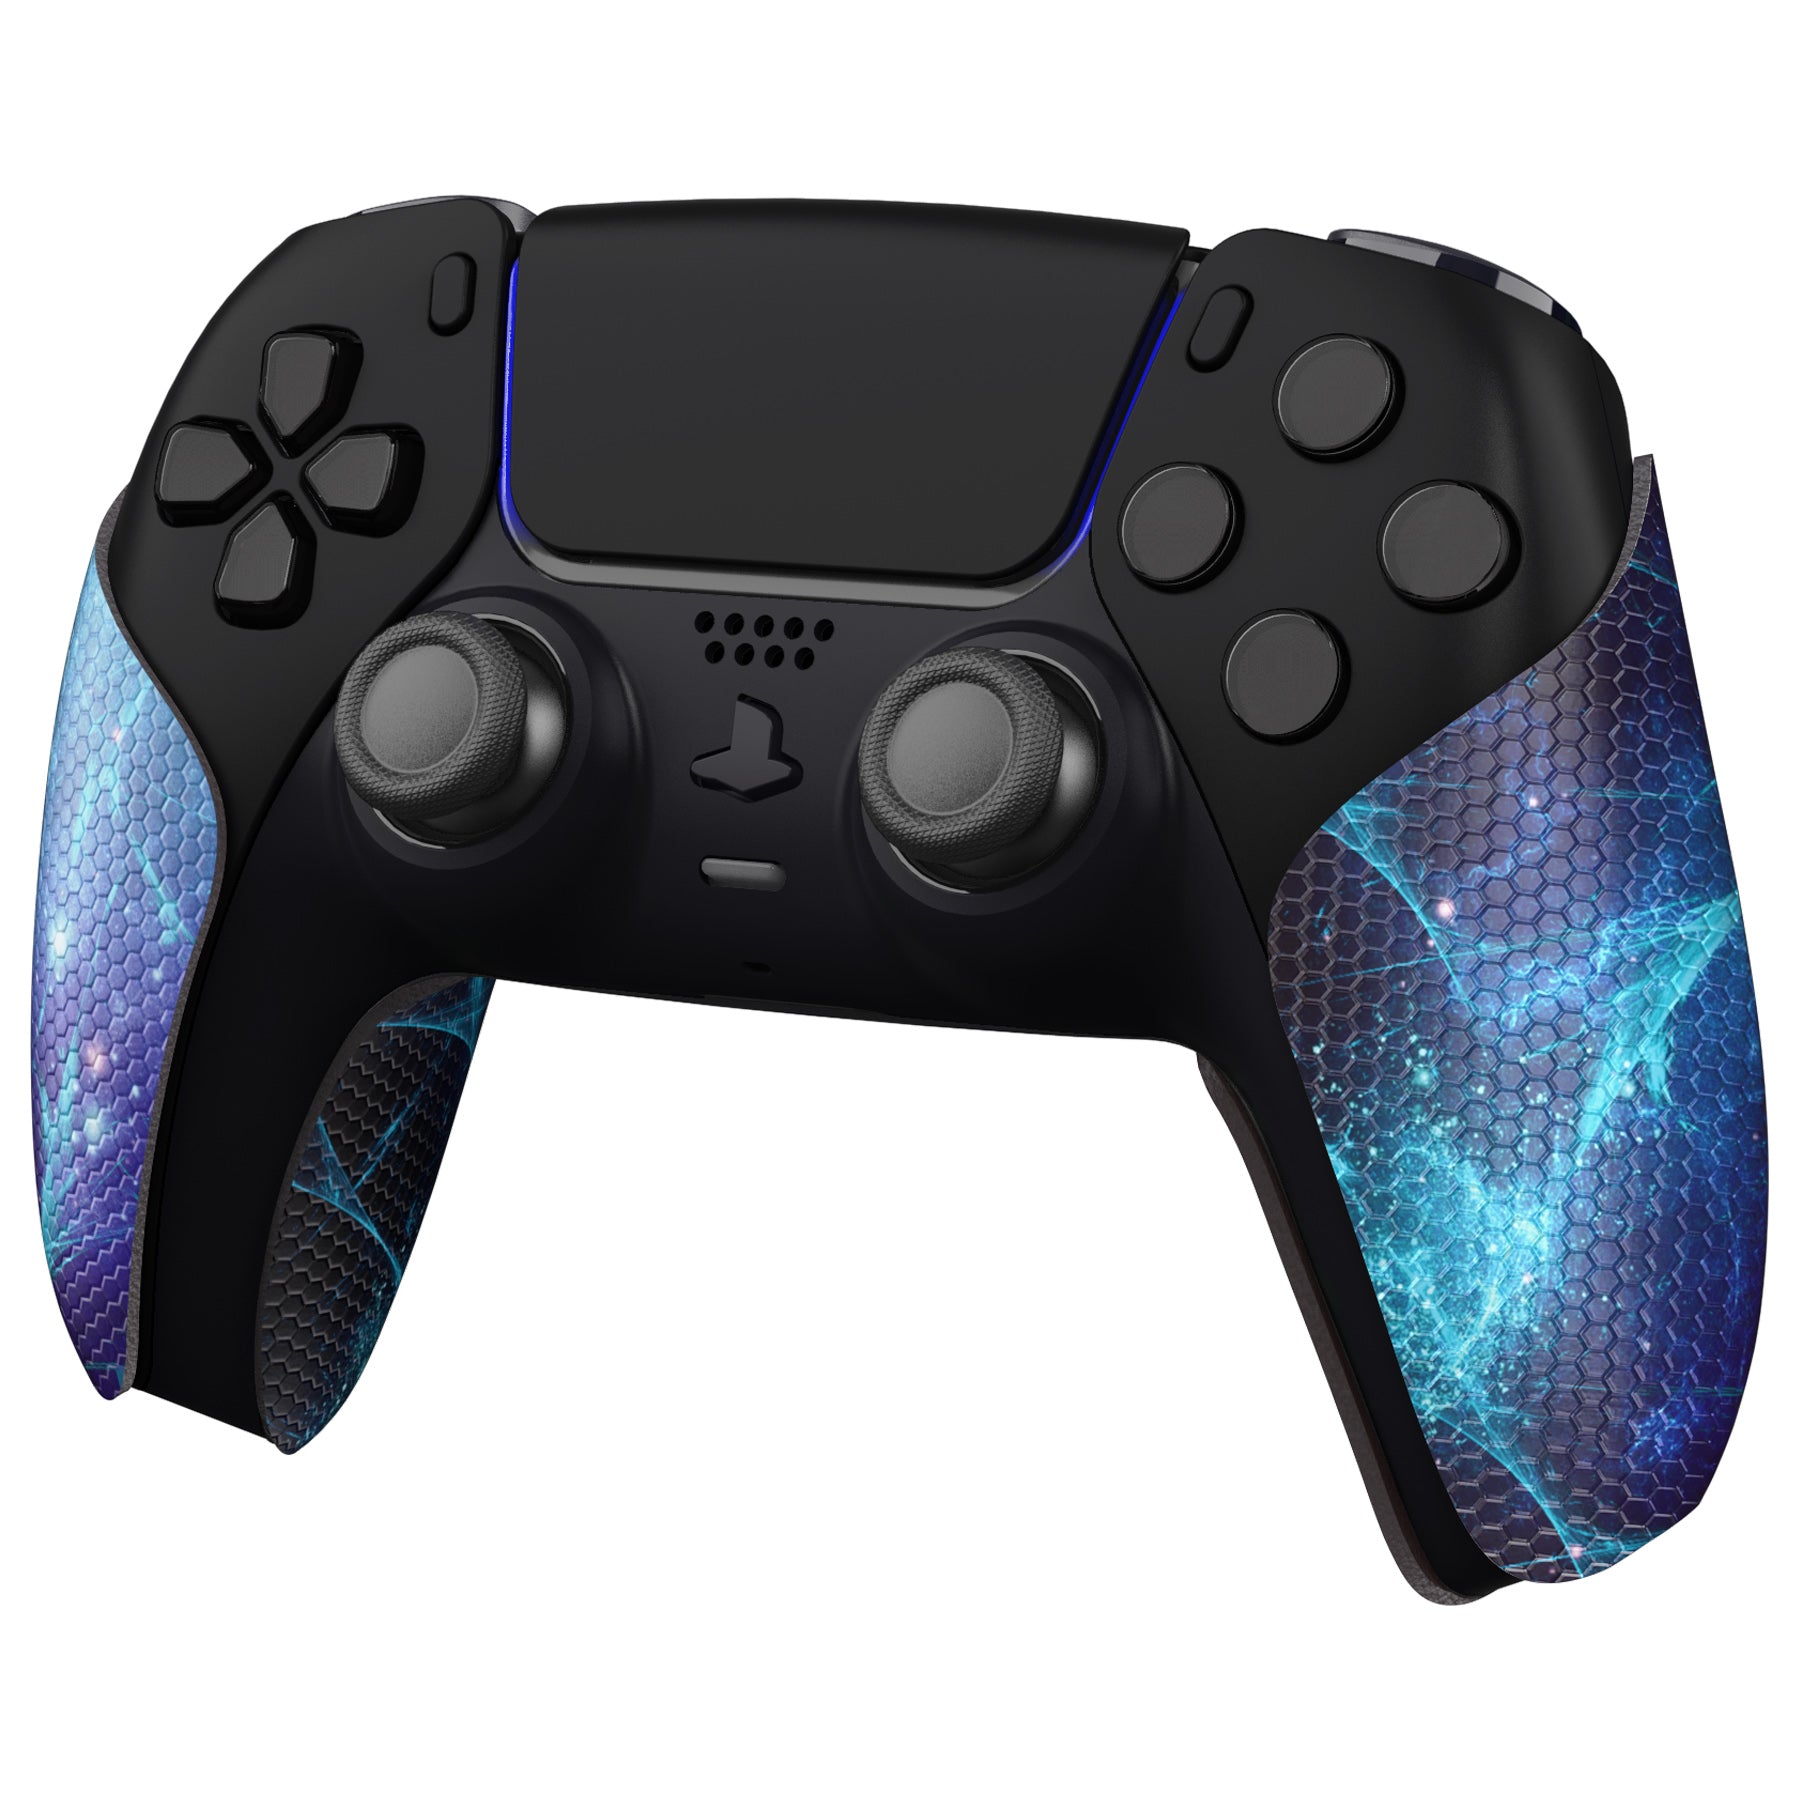 PlayVital Blue Nebula Anti-Skid Sweat-Absorbent Controller Grip for PS5 Controller, Professional Textured Soft Rubber Pads Handle Grips for PS5 Controller - PFPJ132 PlayVital